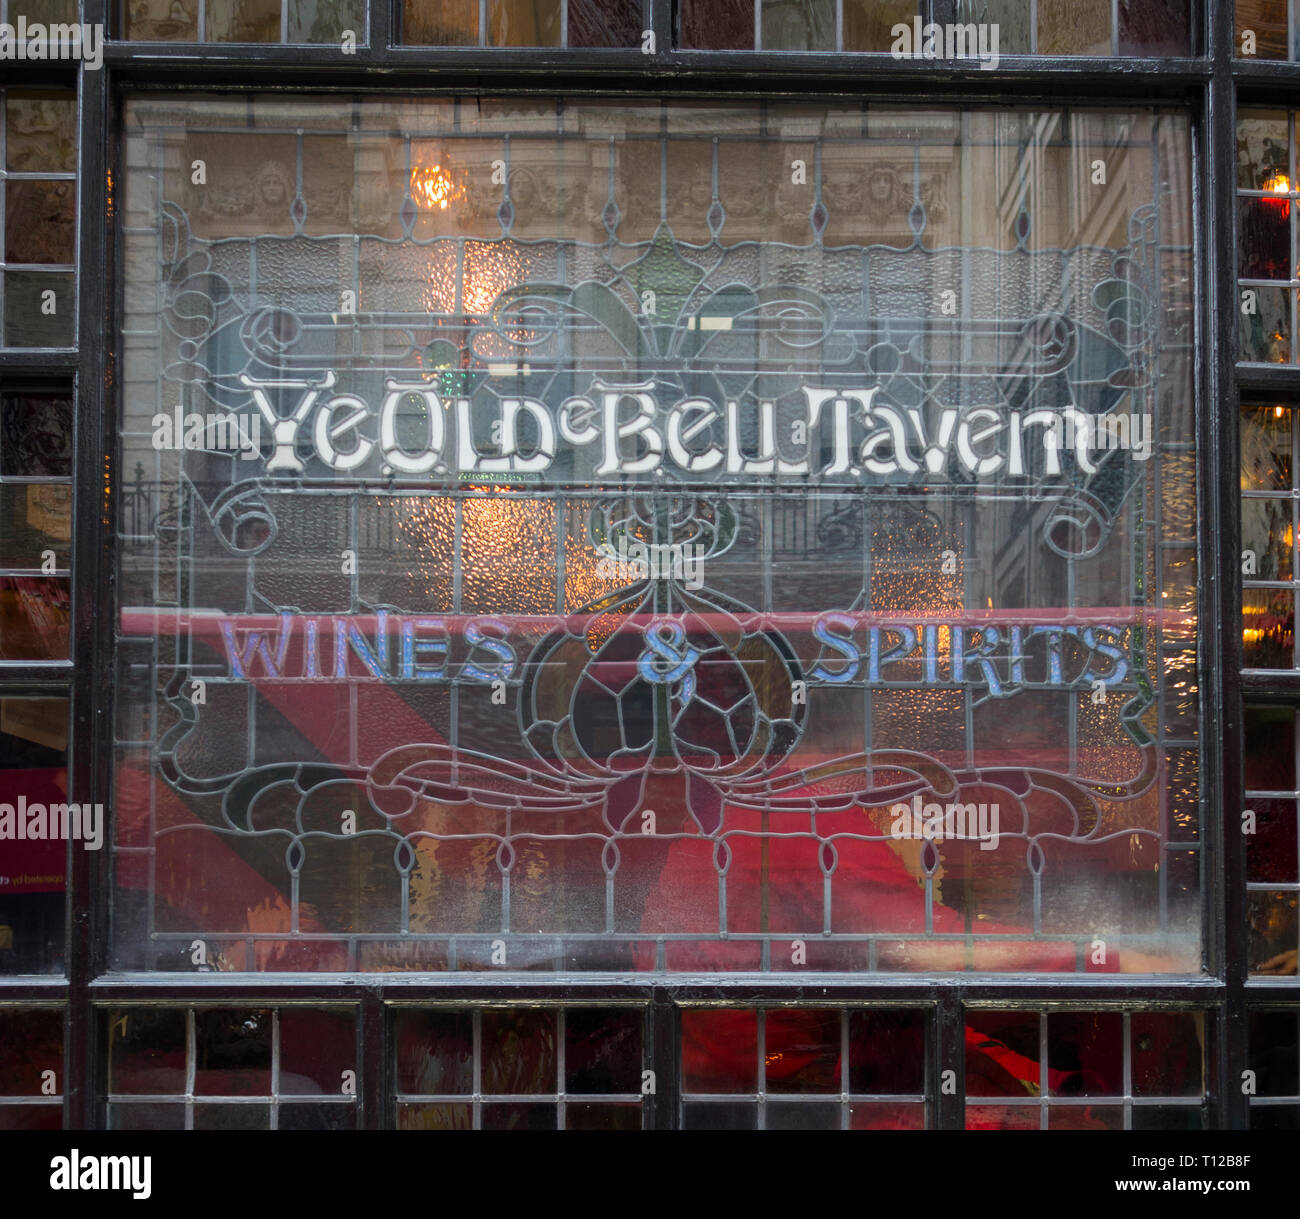 Stained Glass window in the Old Bell Tavern on Fleet Street, London, UK Stock Photo